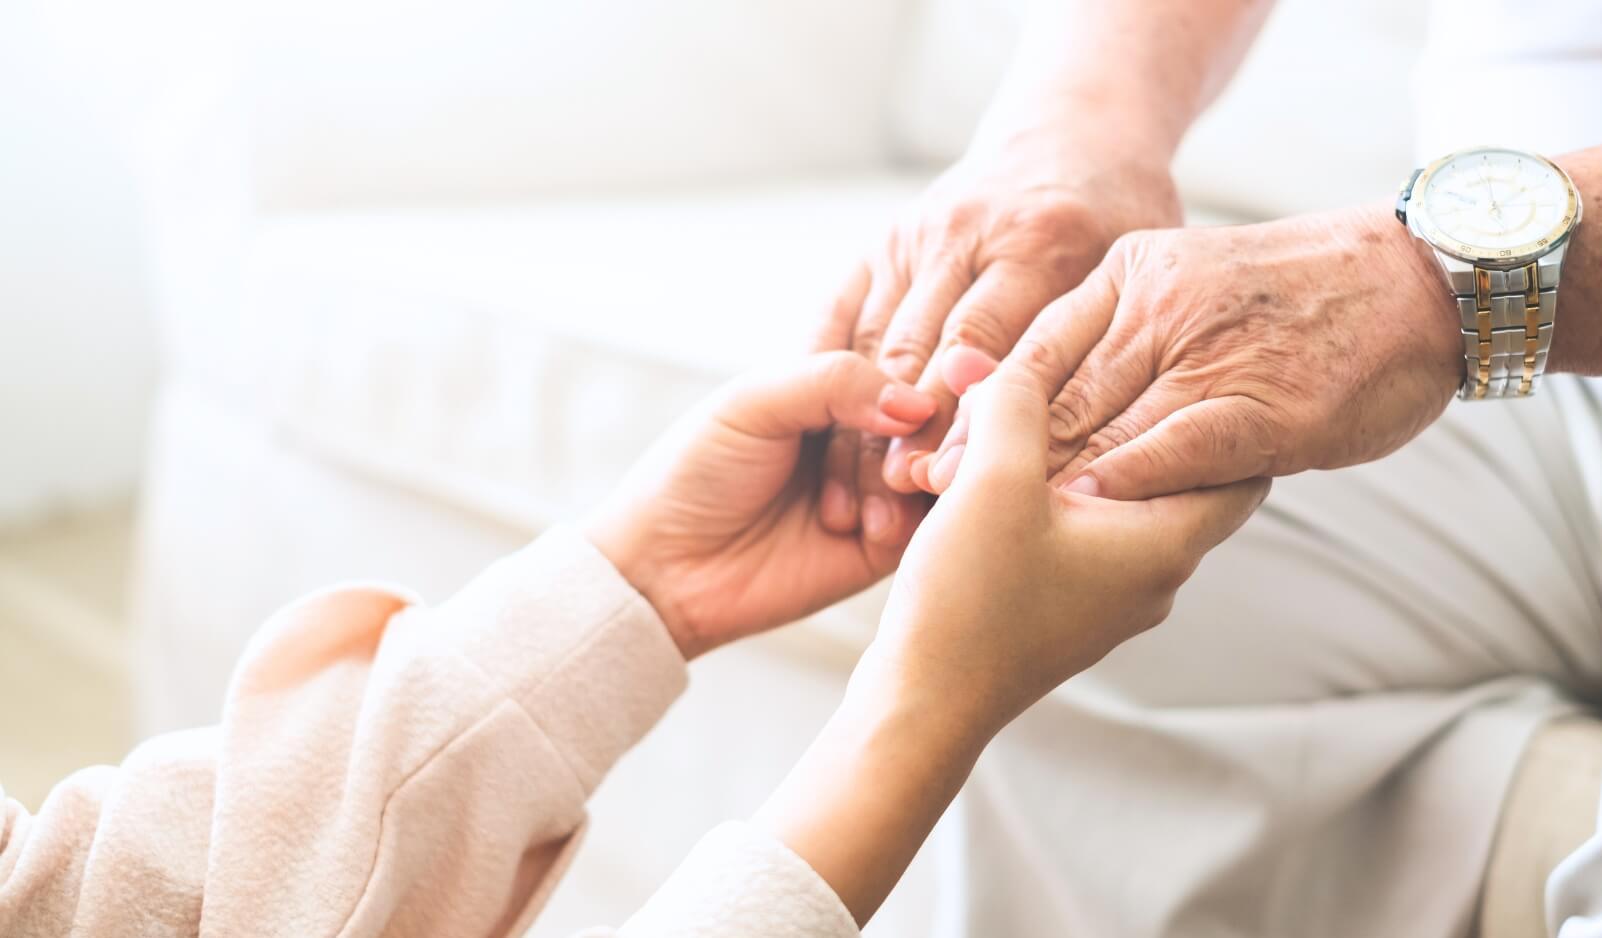 A young person compassionately holding a senior's hand to symbolize mindfulness and mental well-being for seniors.